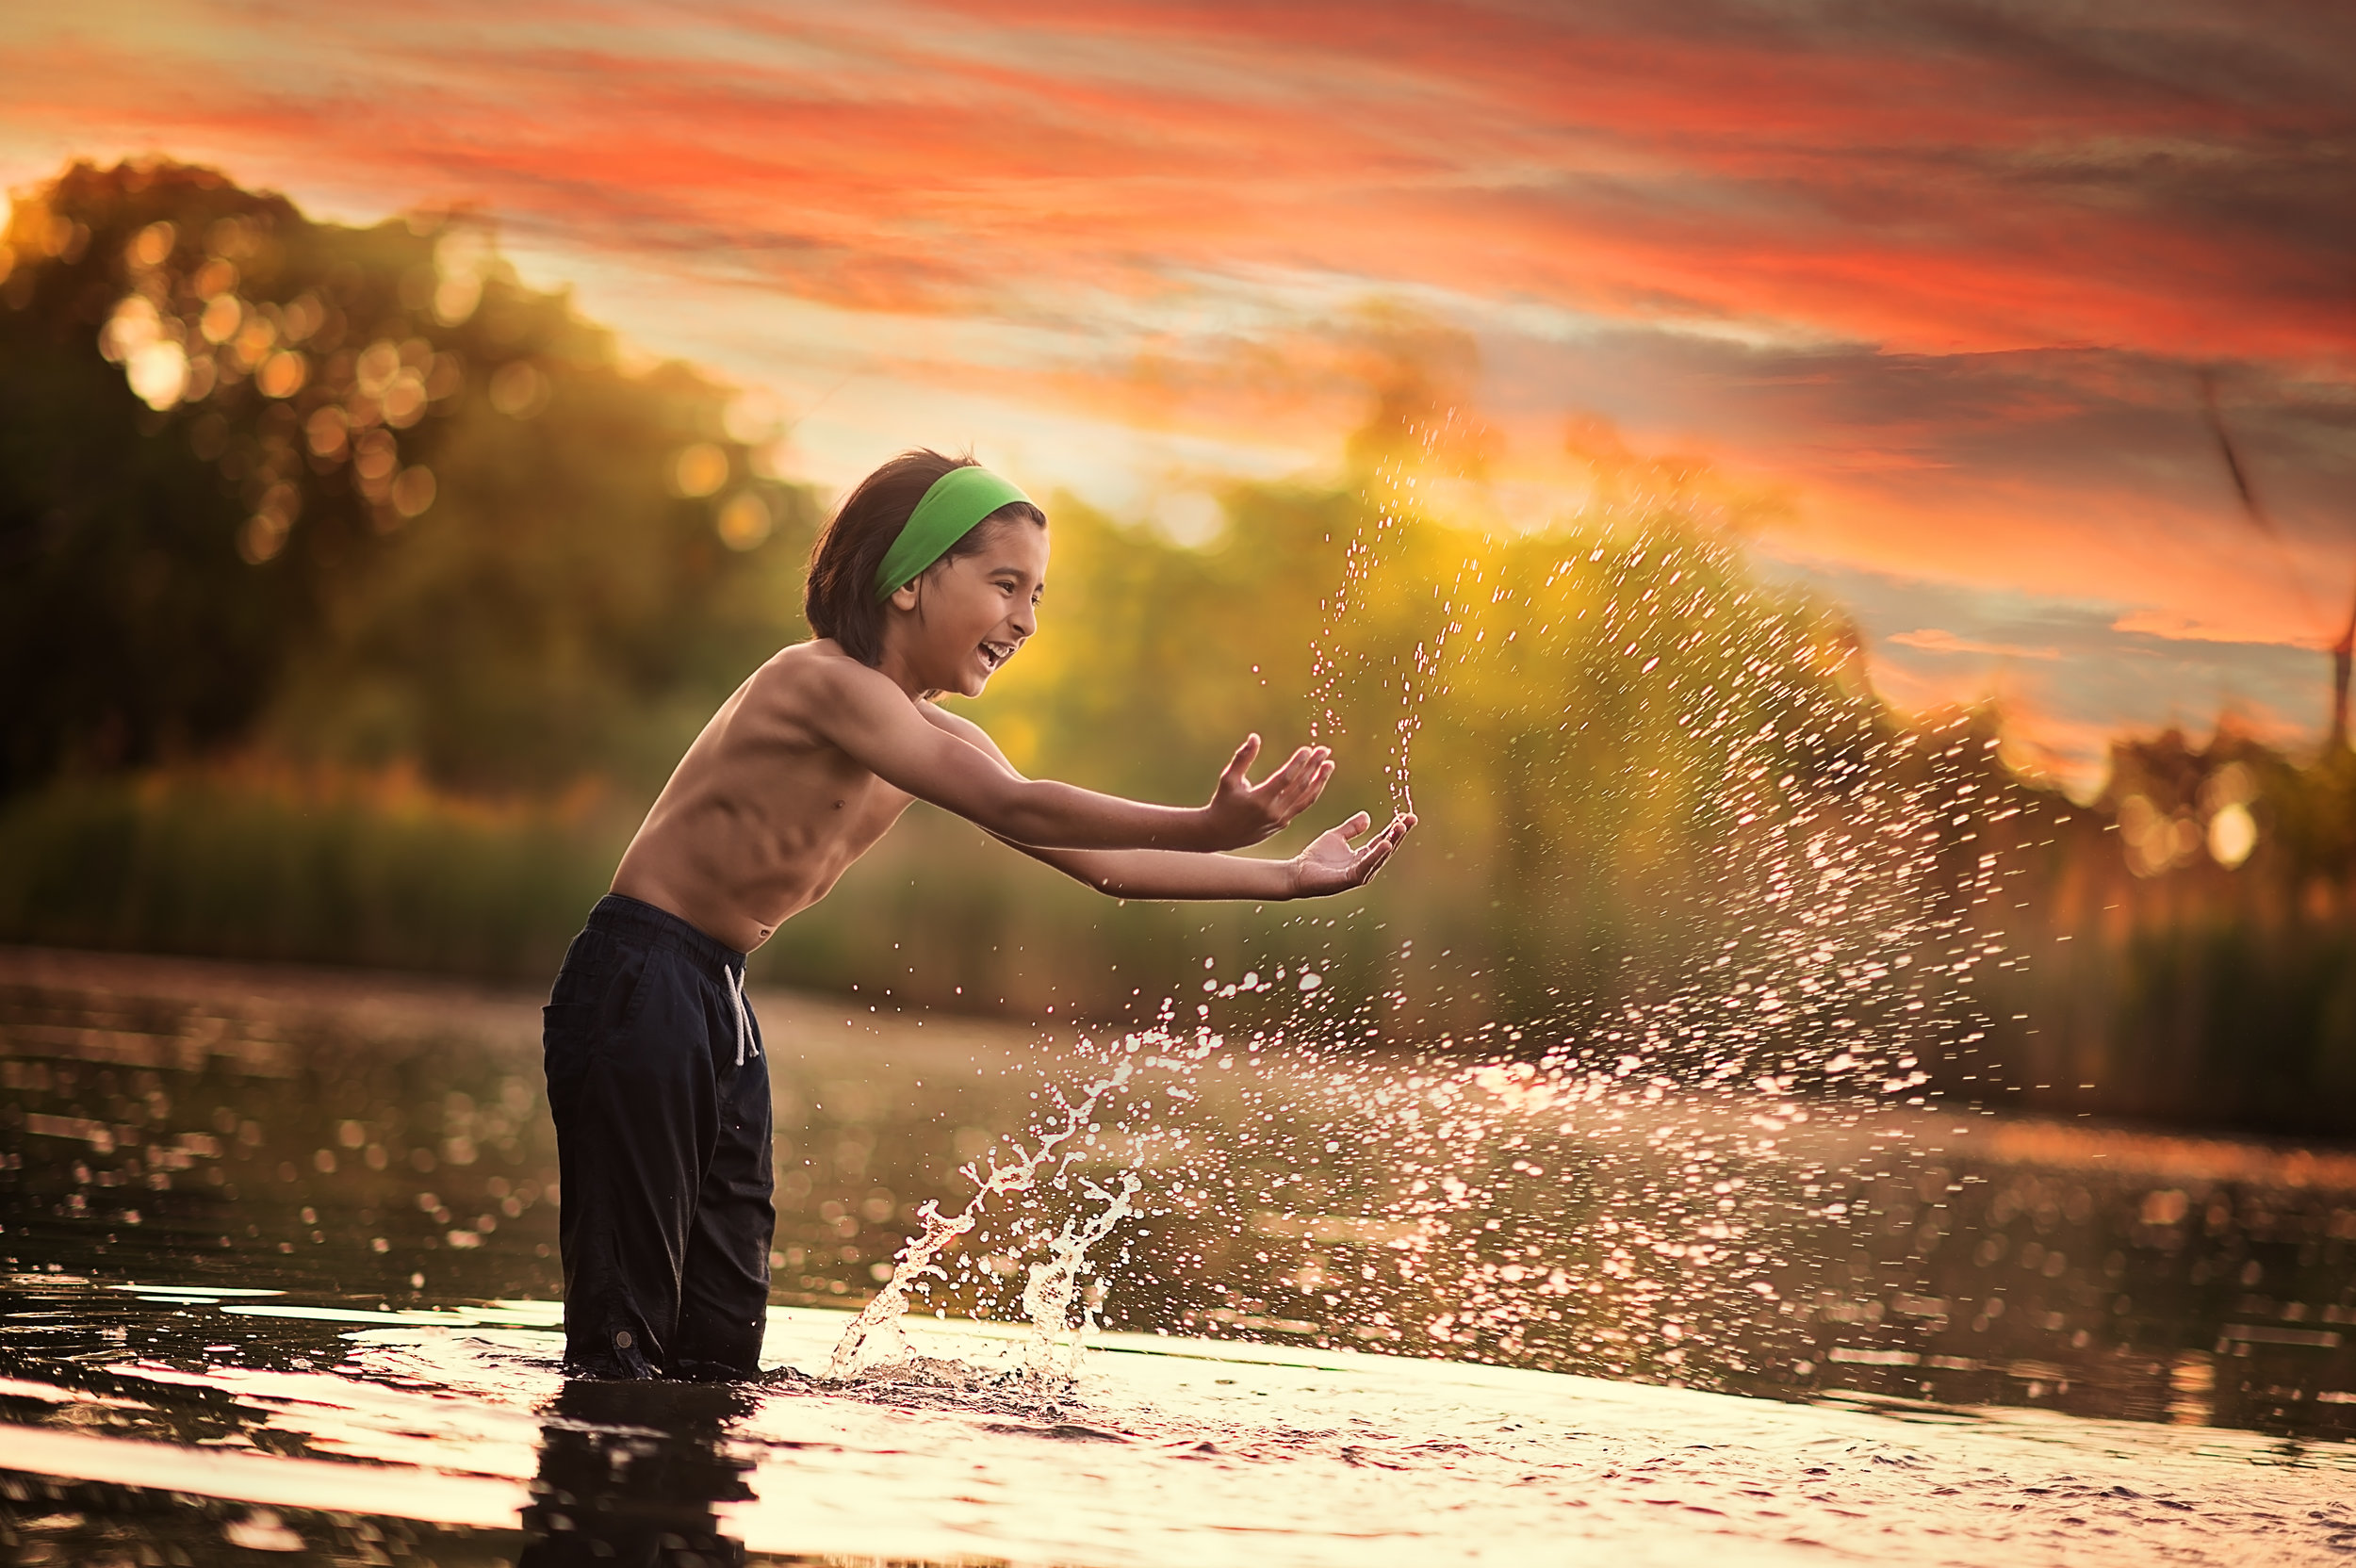 Boy enjoying an outdoor photoshoot in water by Sri and Jana Photography